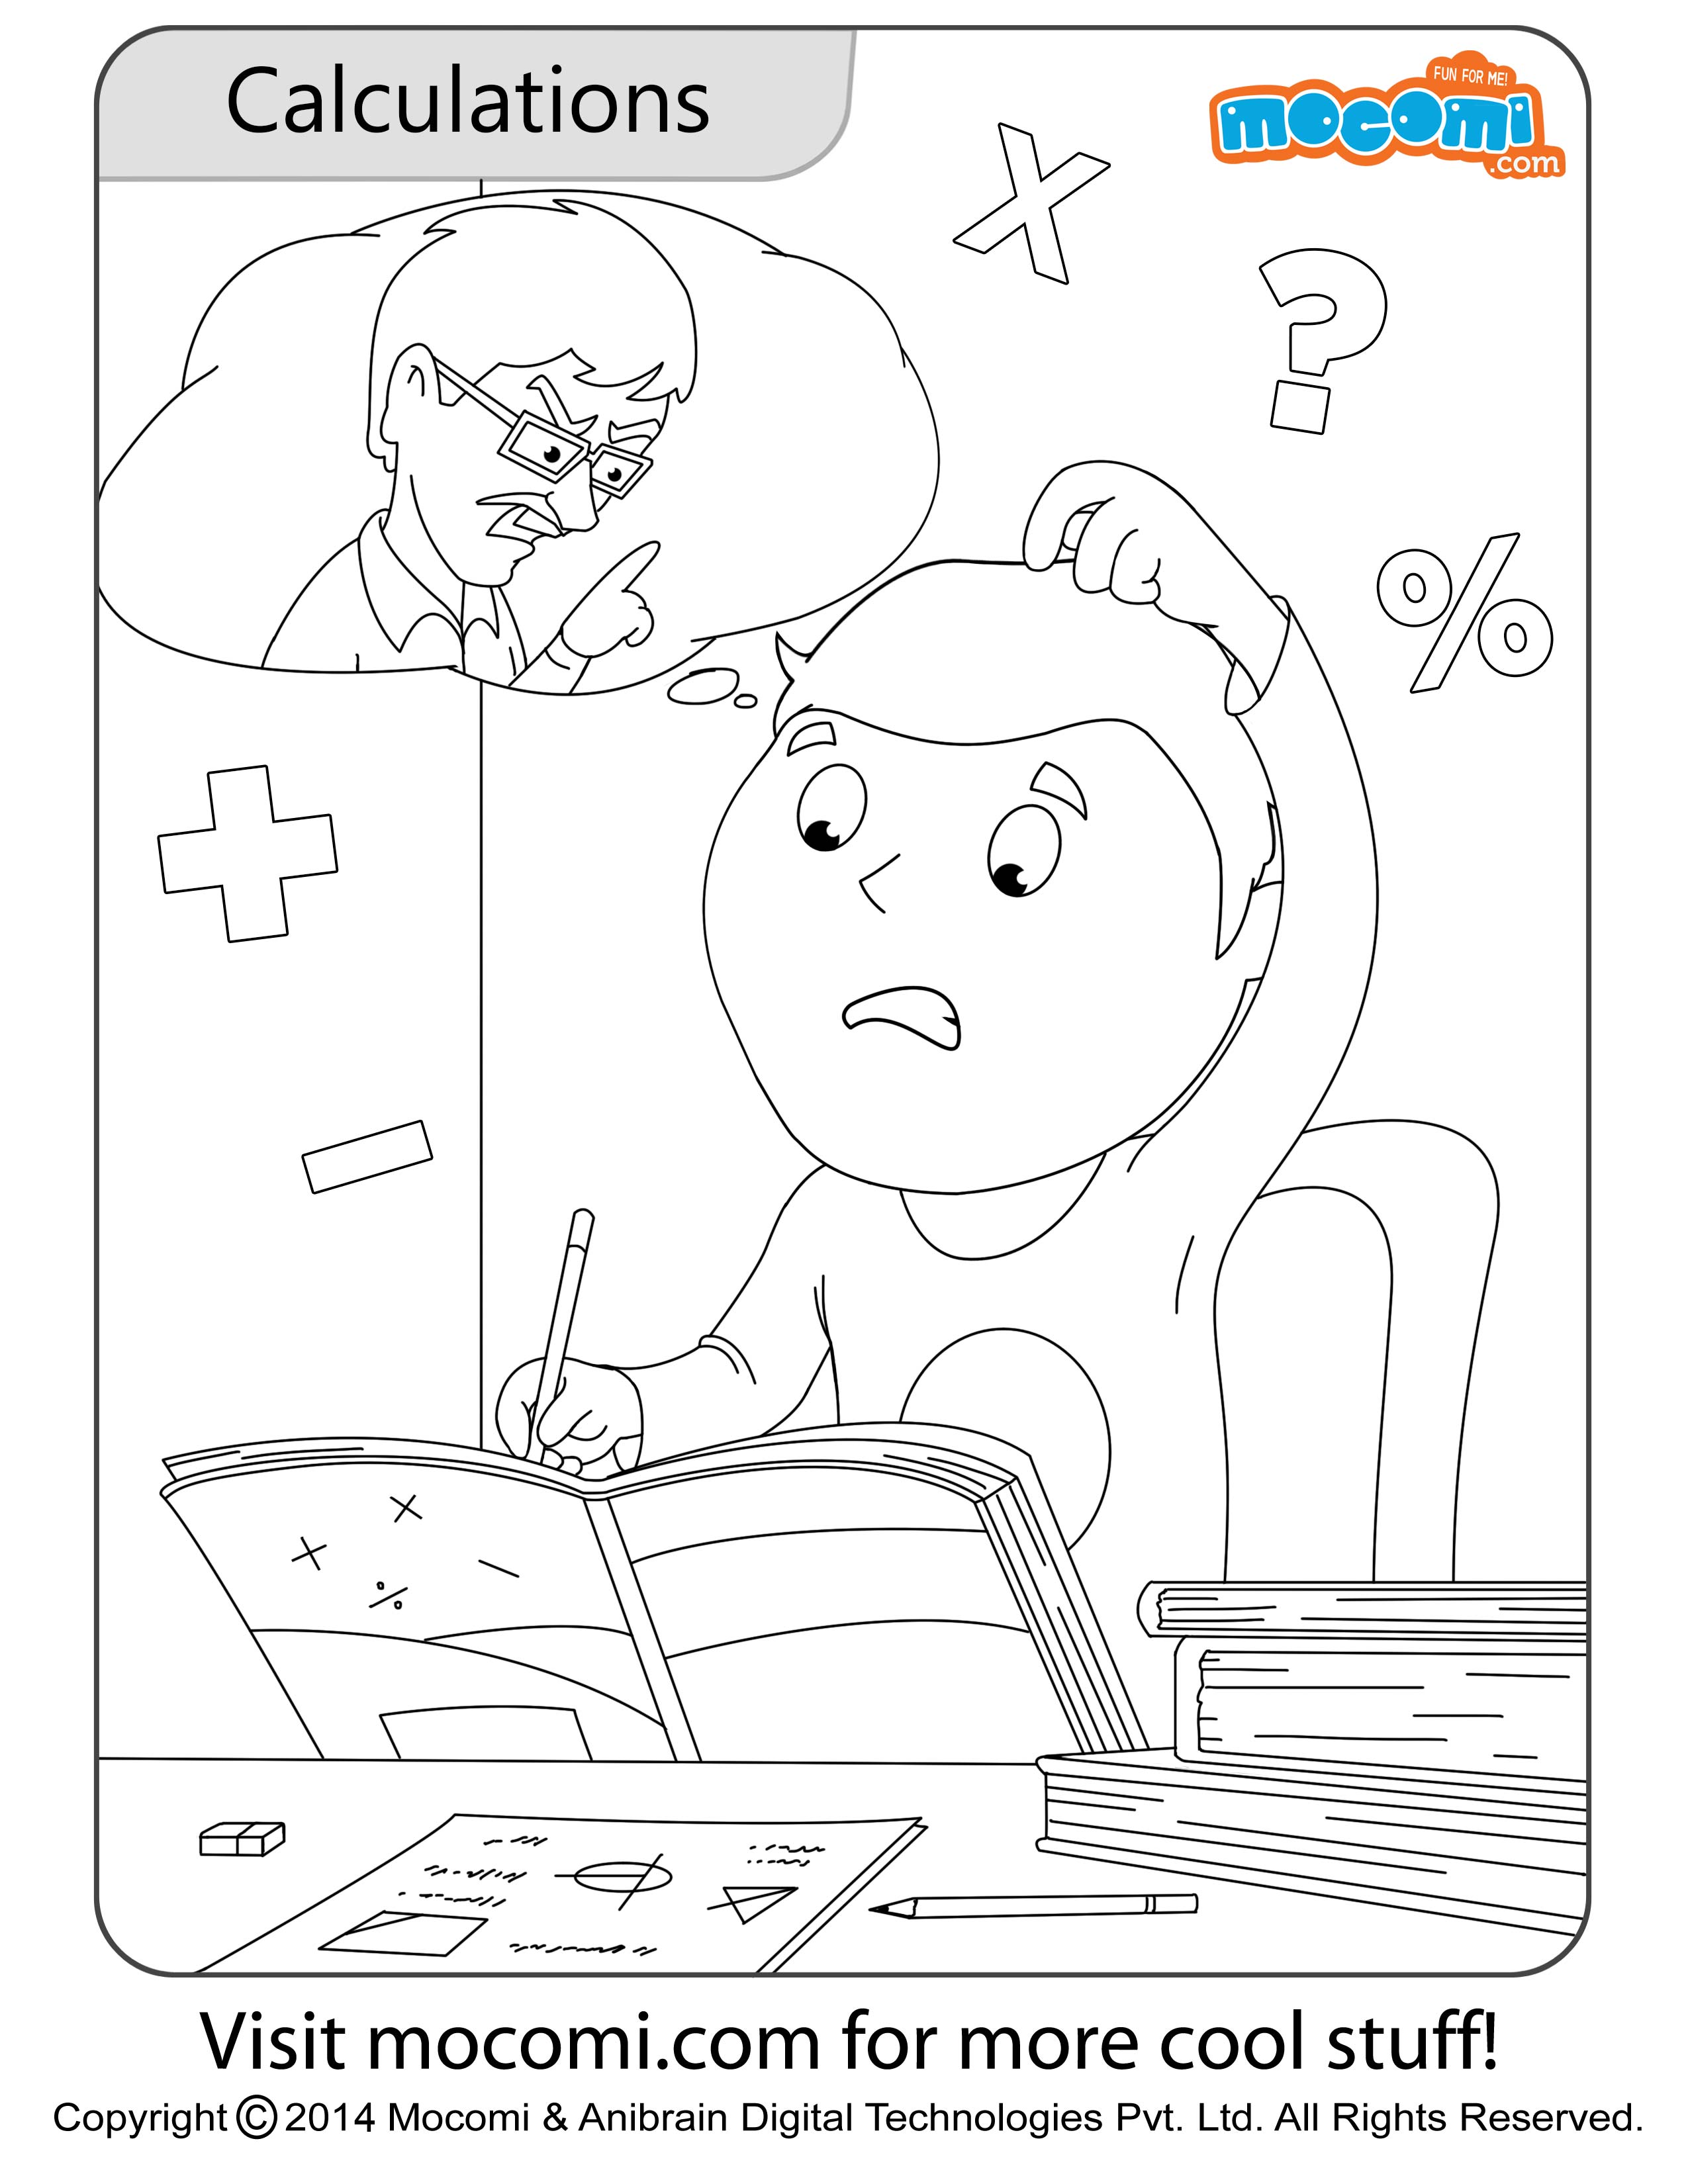 Jojo Calculations – Colouring Page